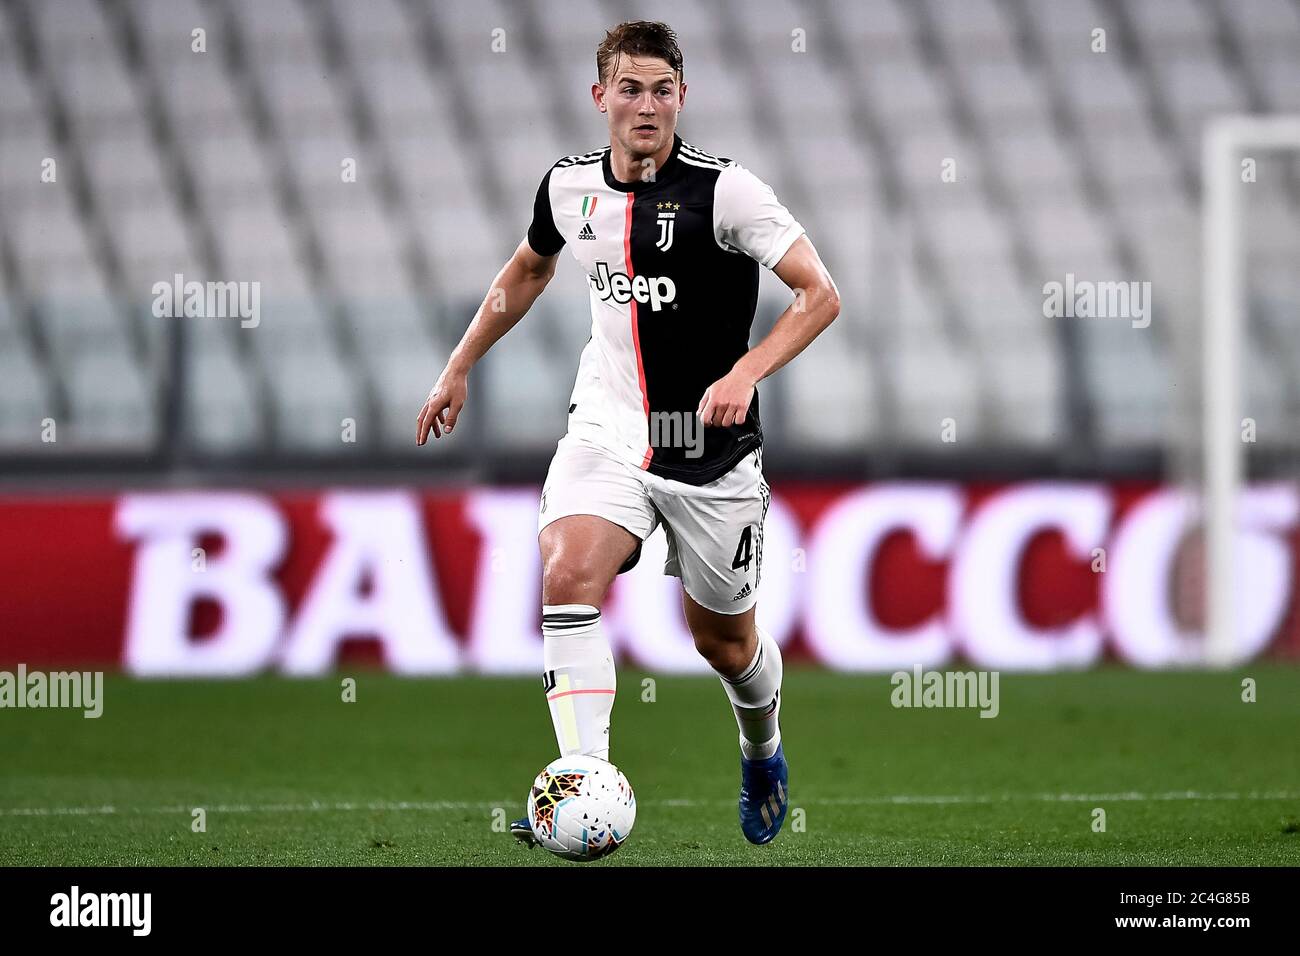 Turin, Italy. 26th June, 2020. TURIN, ITALY - June 26, 2020: Matthijs de Ligt of Juventus FC in action during the Serie A football match between Juventus FC and US Lecce. Juventus FC won 4-0 over US Lecce. (Photo by Nicolò Campo/Sipa USA) Credit: Sipa USA/Alamy Live News Stock Photo